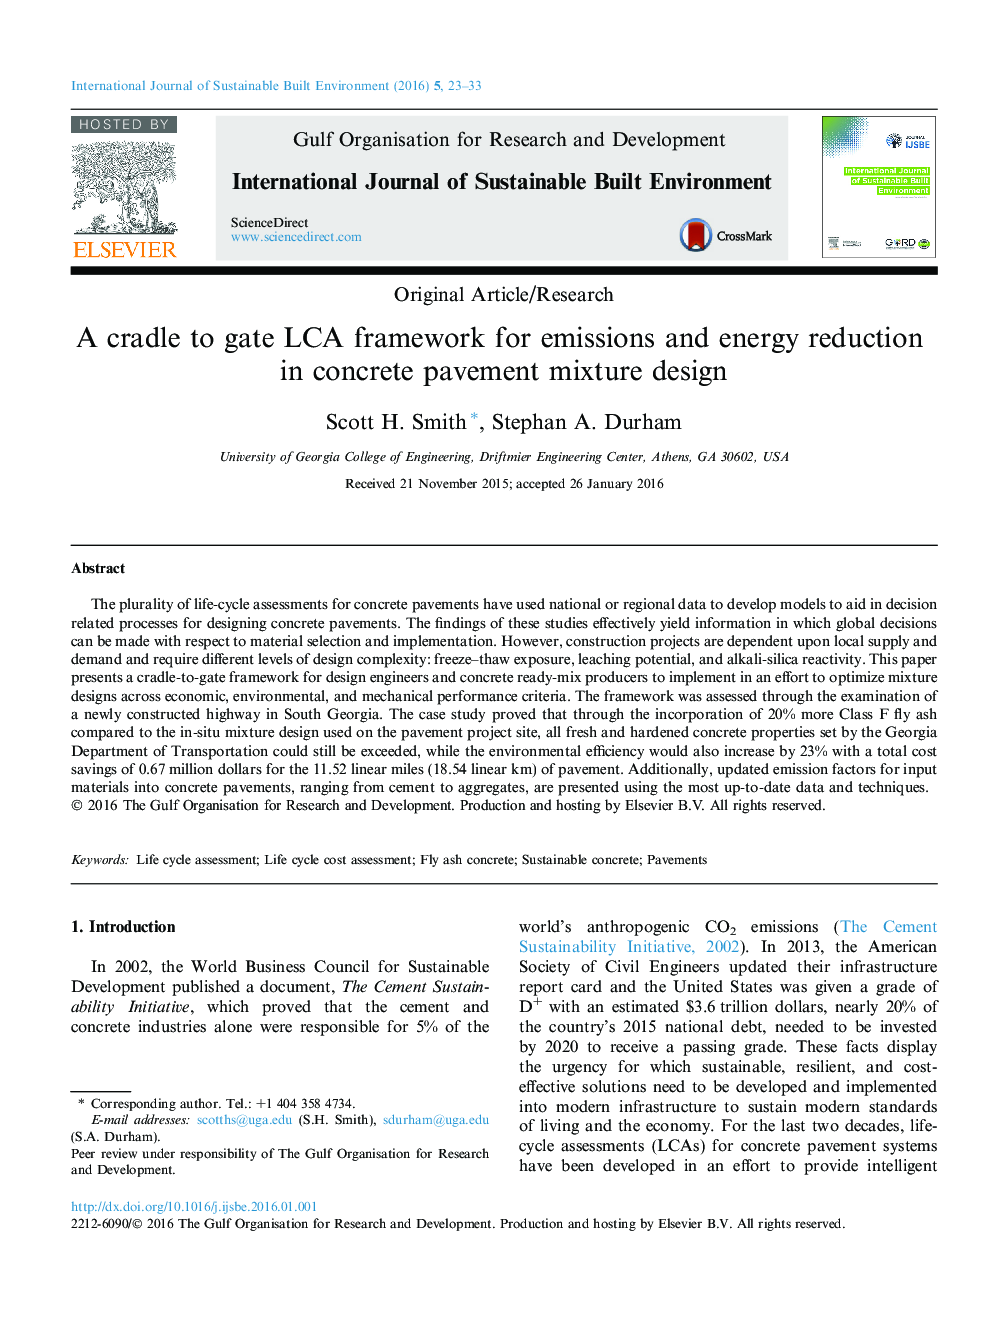 A cradle to gate LCA framework for emissions and energy reduction in concrete pavement mixture design 